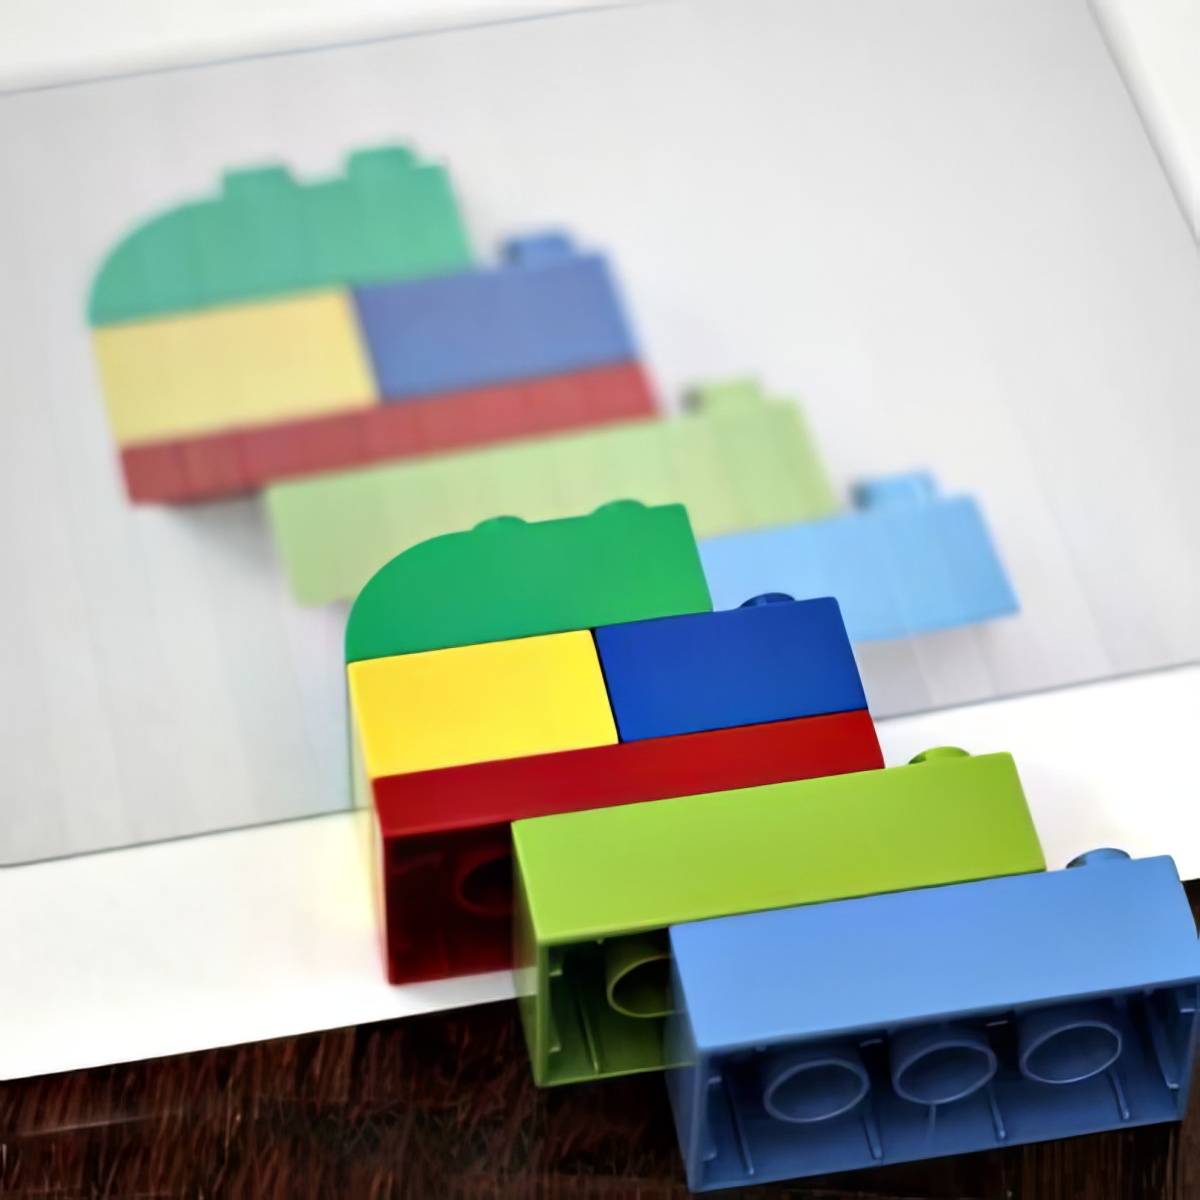 LEGO Instruction Book, Create your own LEGO puzzle book, creative lego puzzle